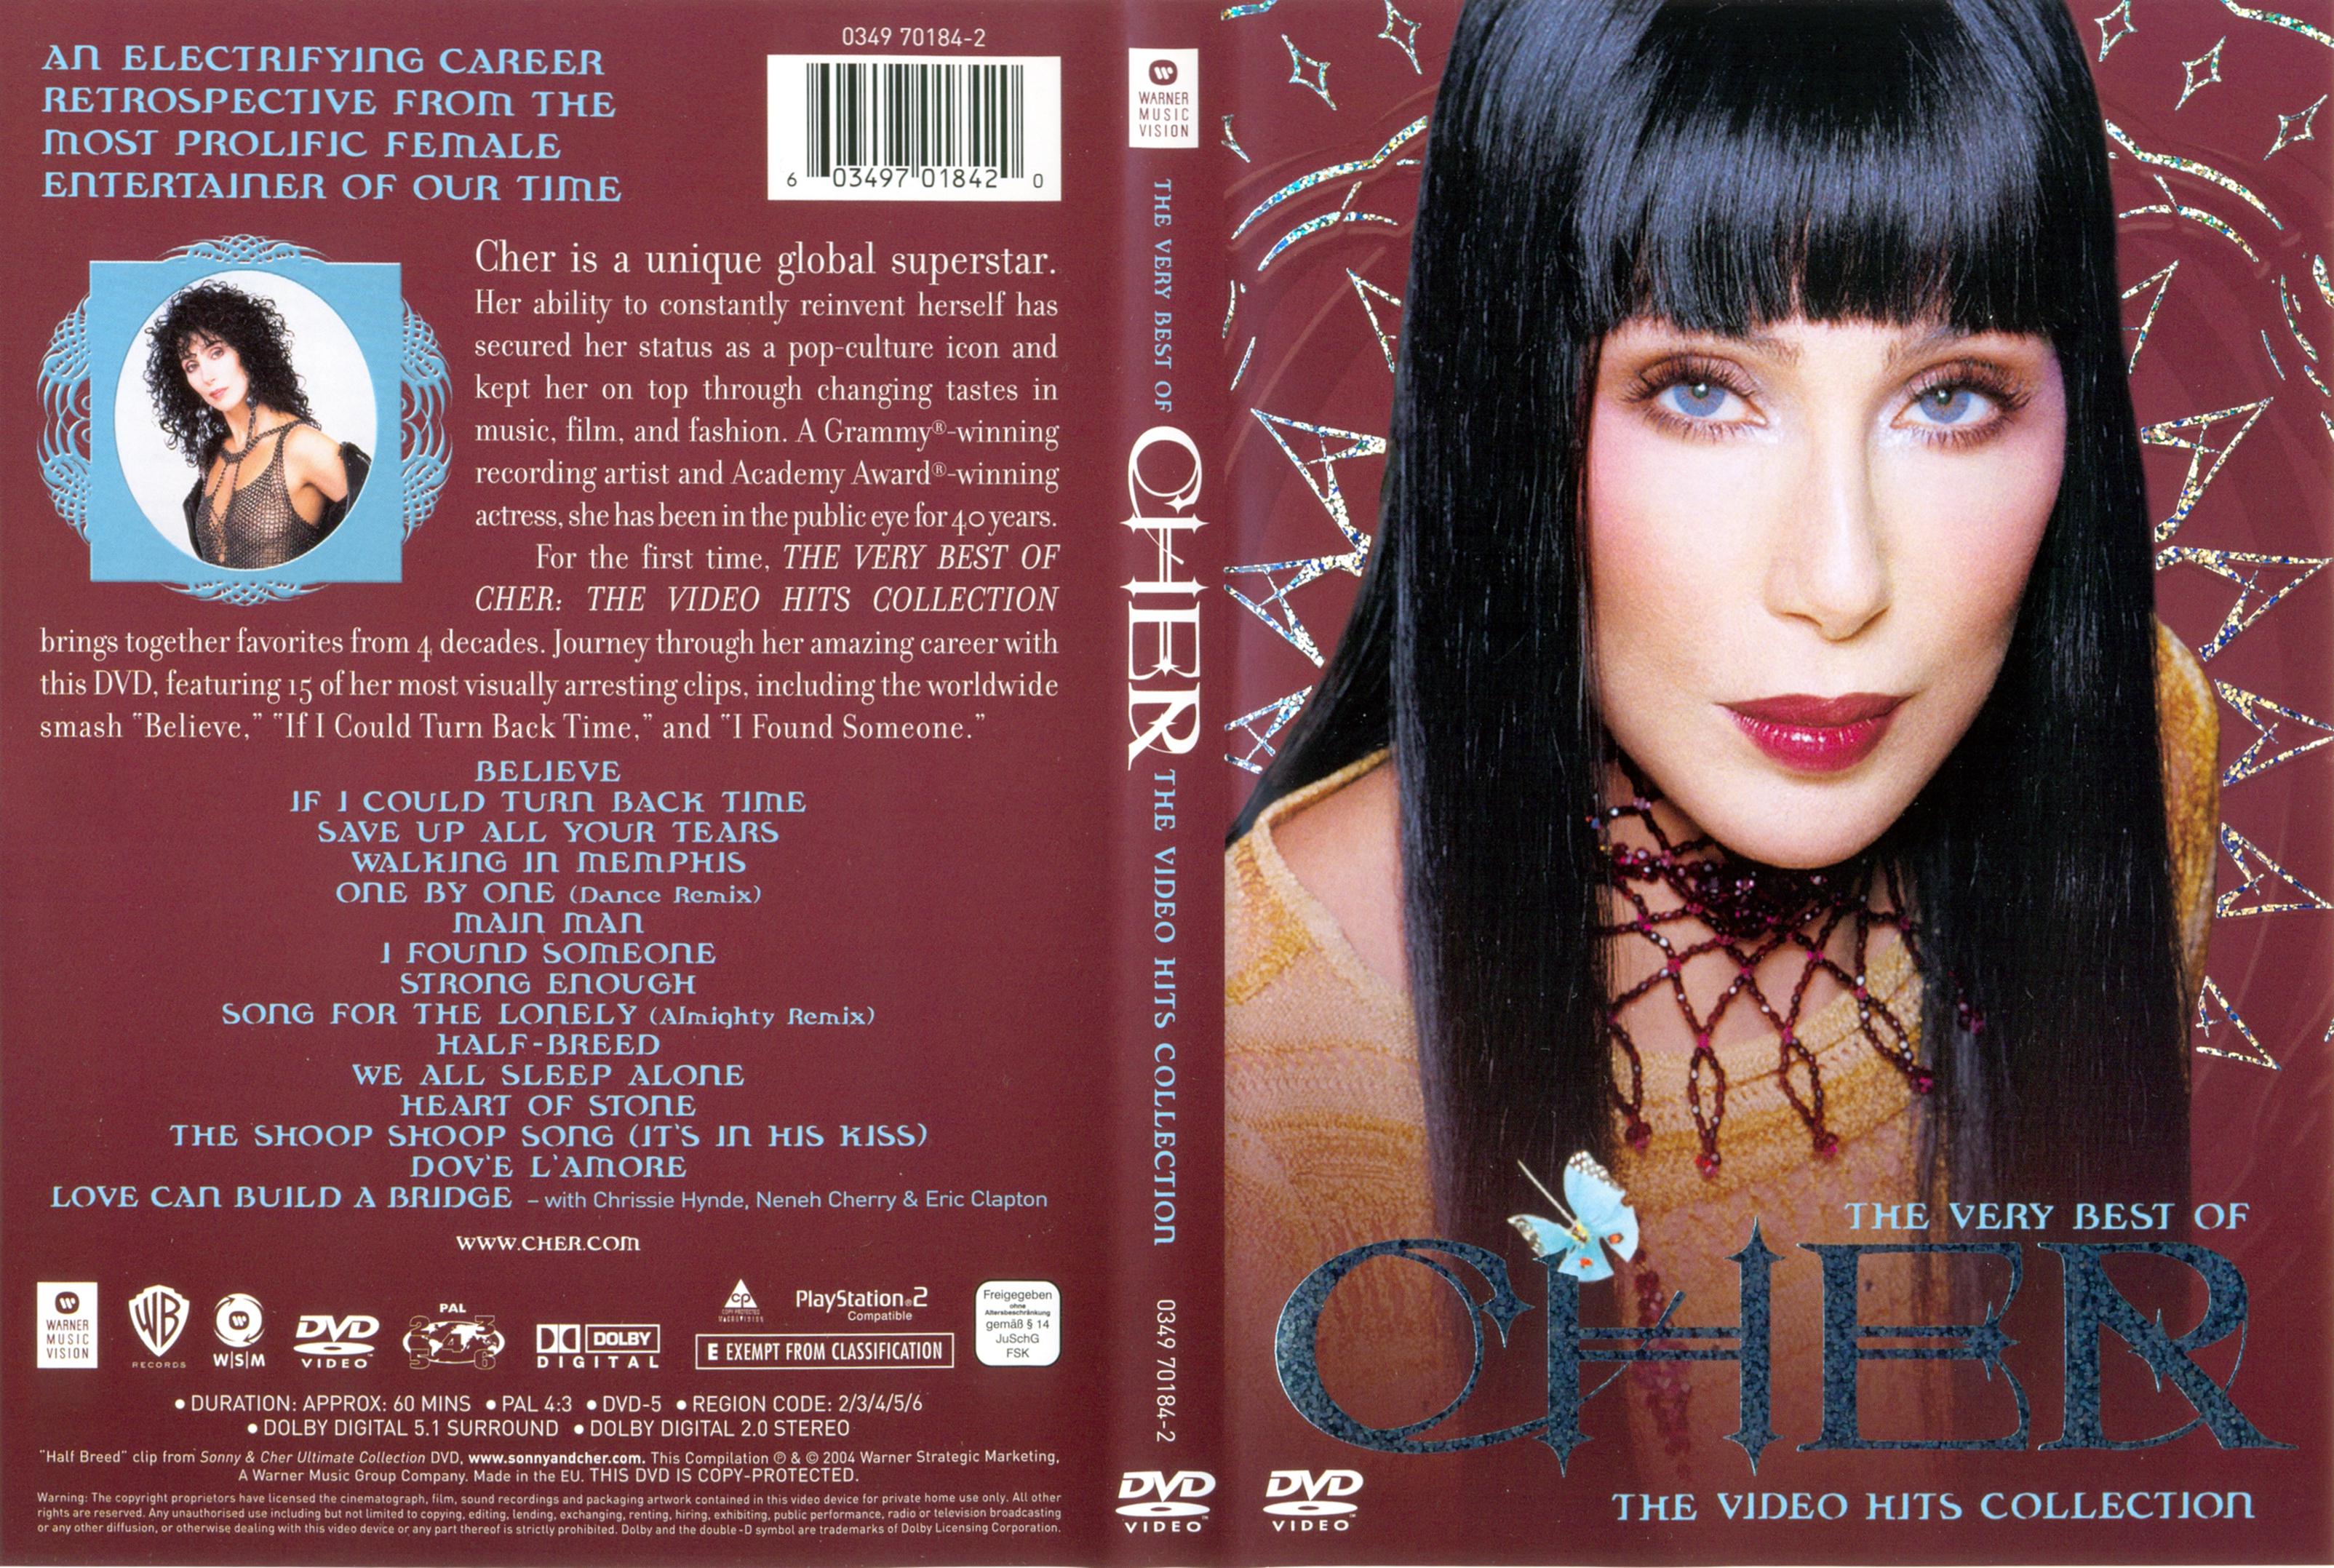 Jaquette DVD Cher - The very best of